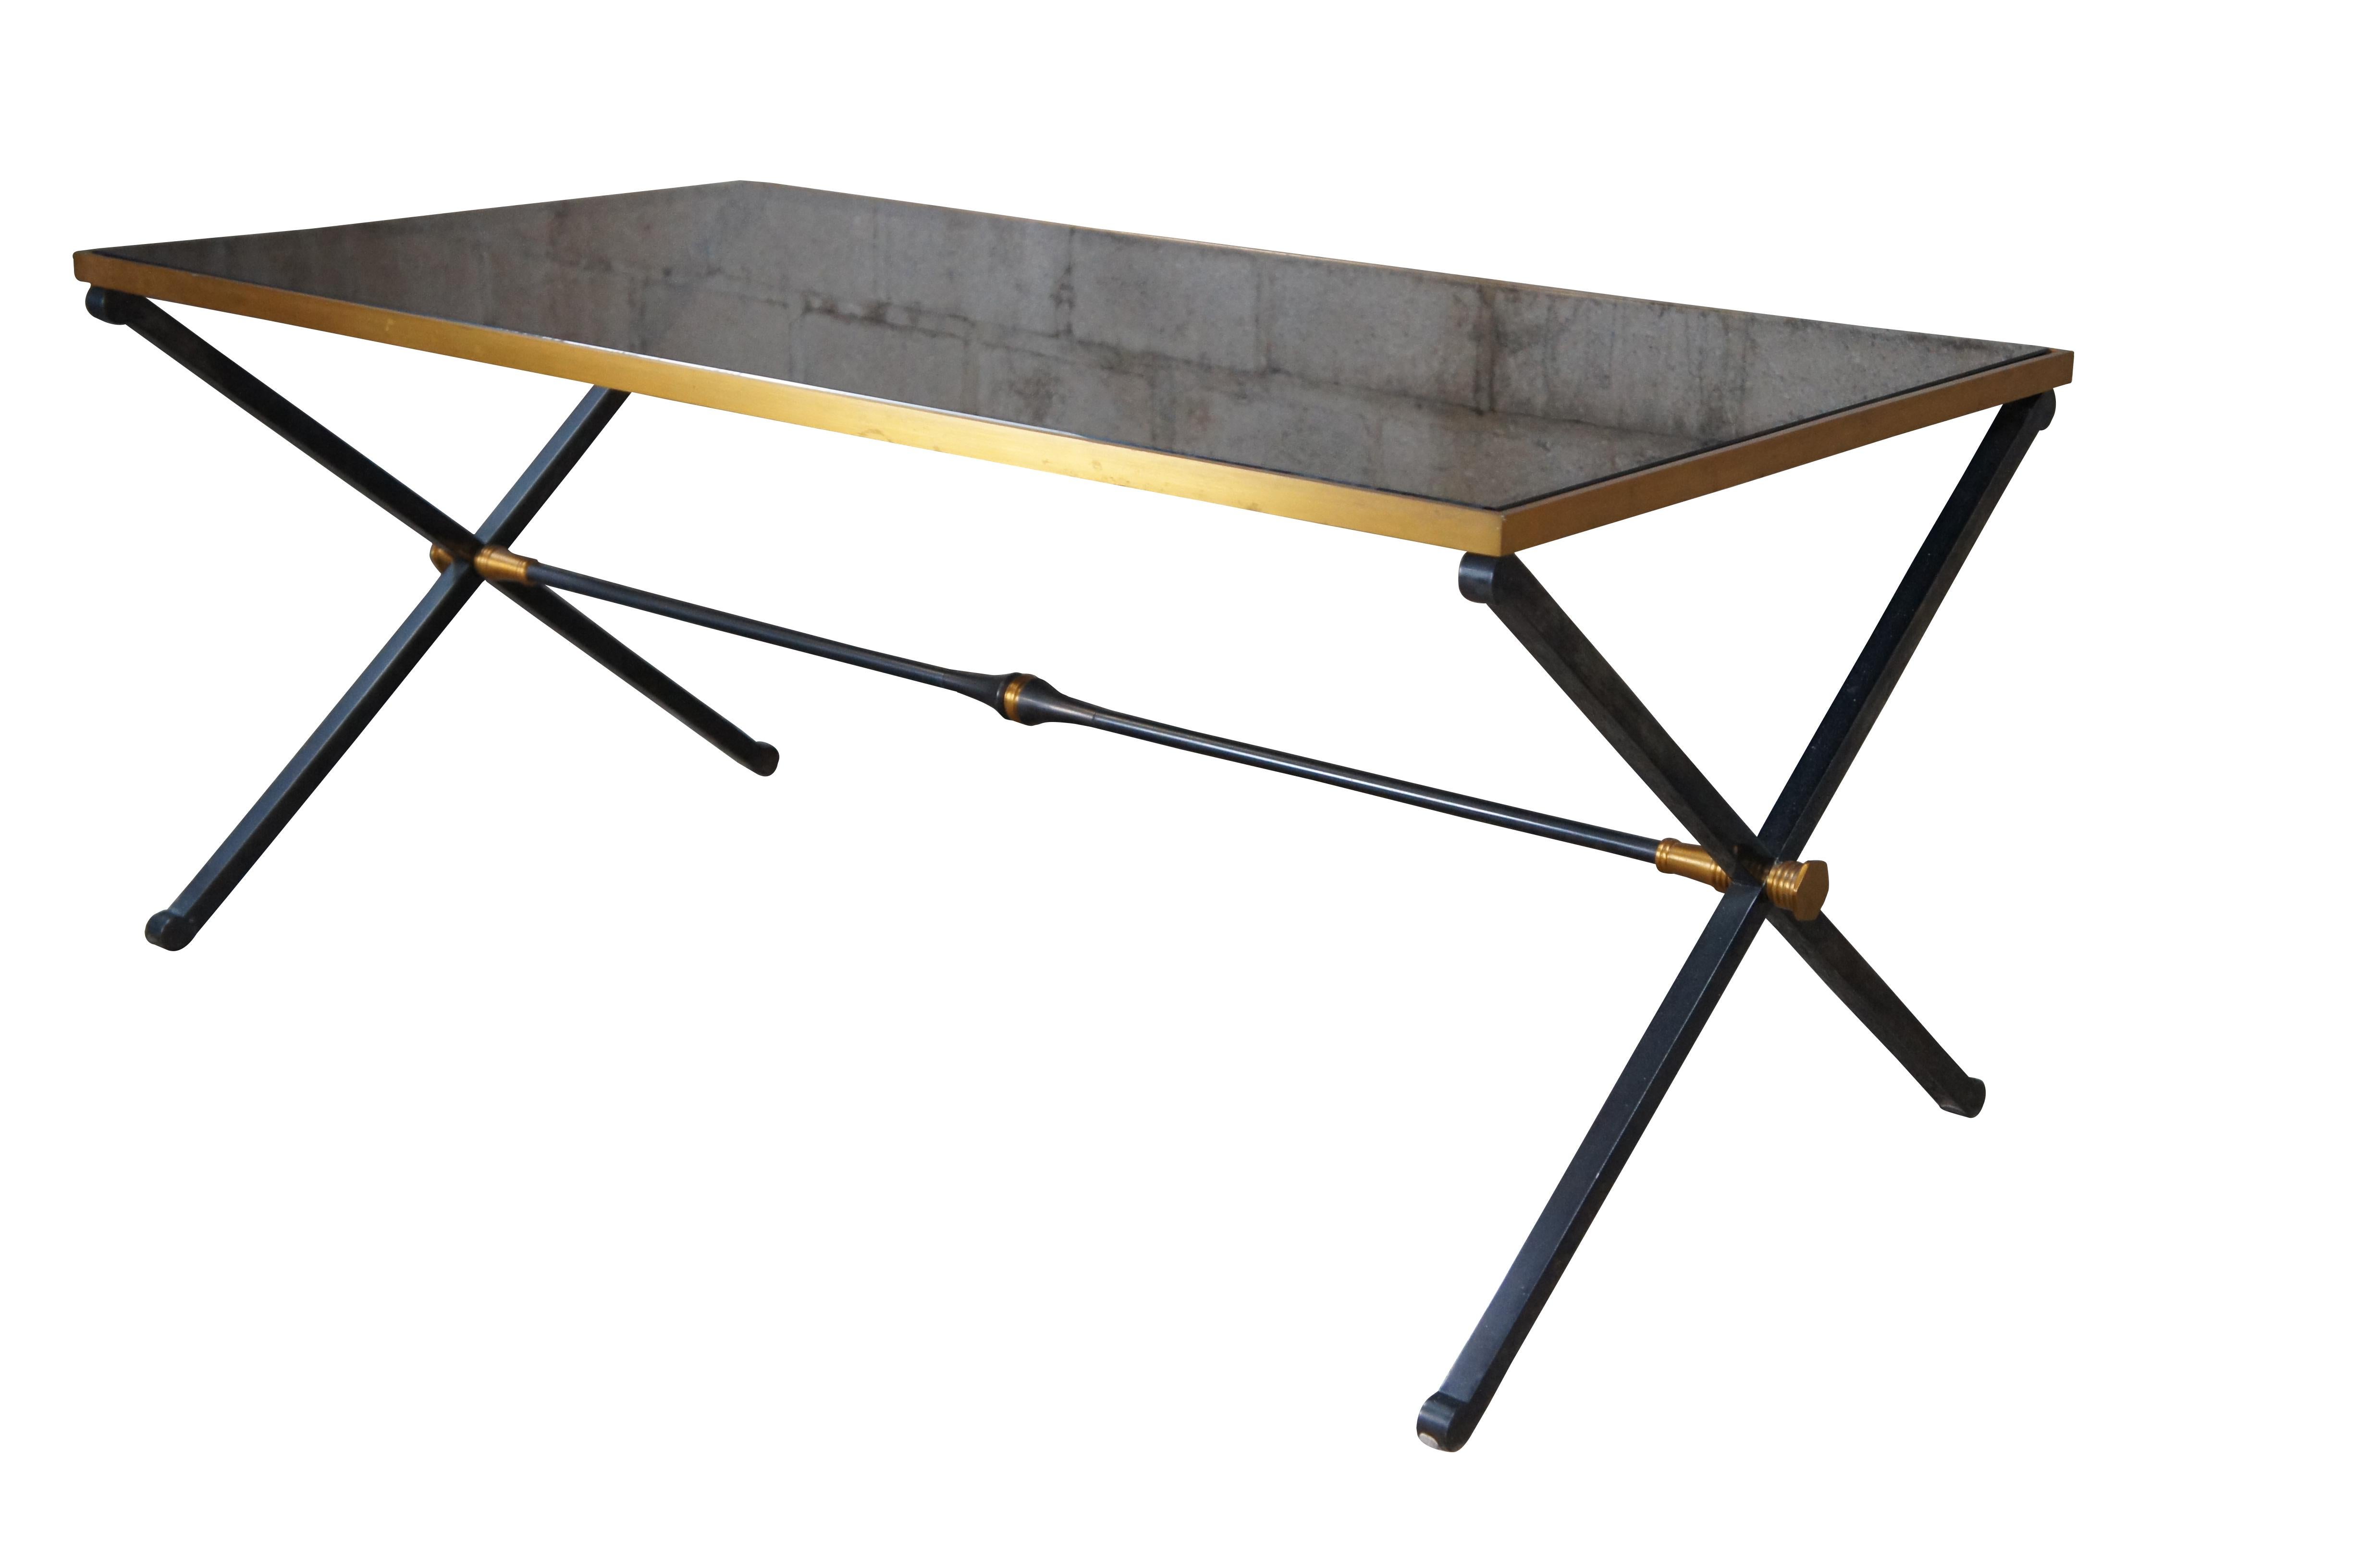 Maison Jansen style Neoclassical modern cocktail table. Made from steel with a black and gold X form base with smoked glass polished edge top. The X frame is connected by cylindrical trestle flared like a trumpet at the center.

Dimensions:
22